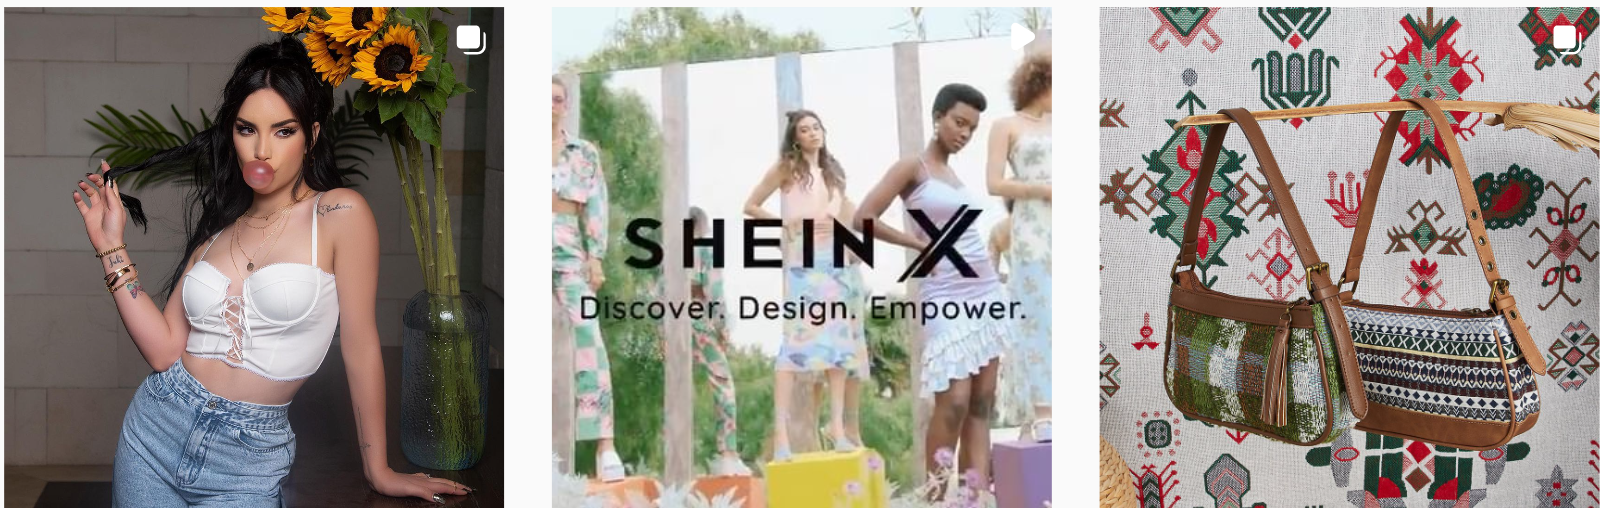 SheIn Two-Piece Set Will Make You Feel Like an Influencer